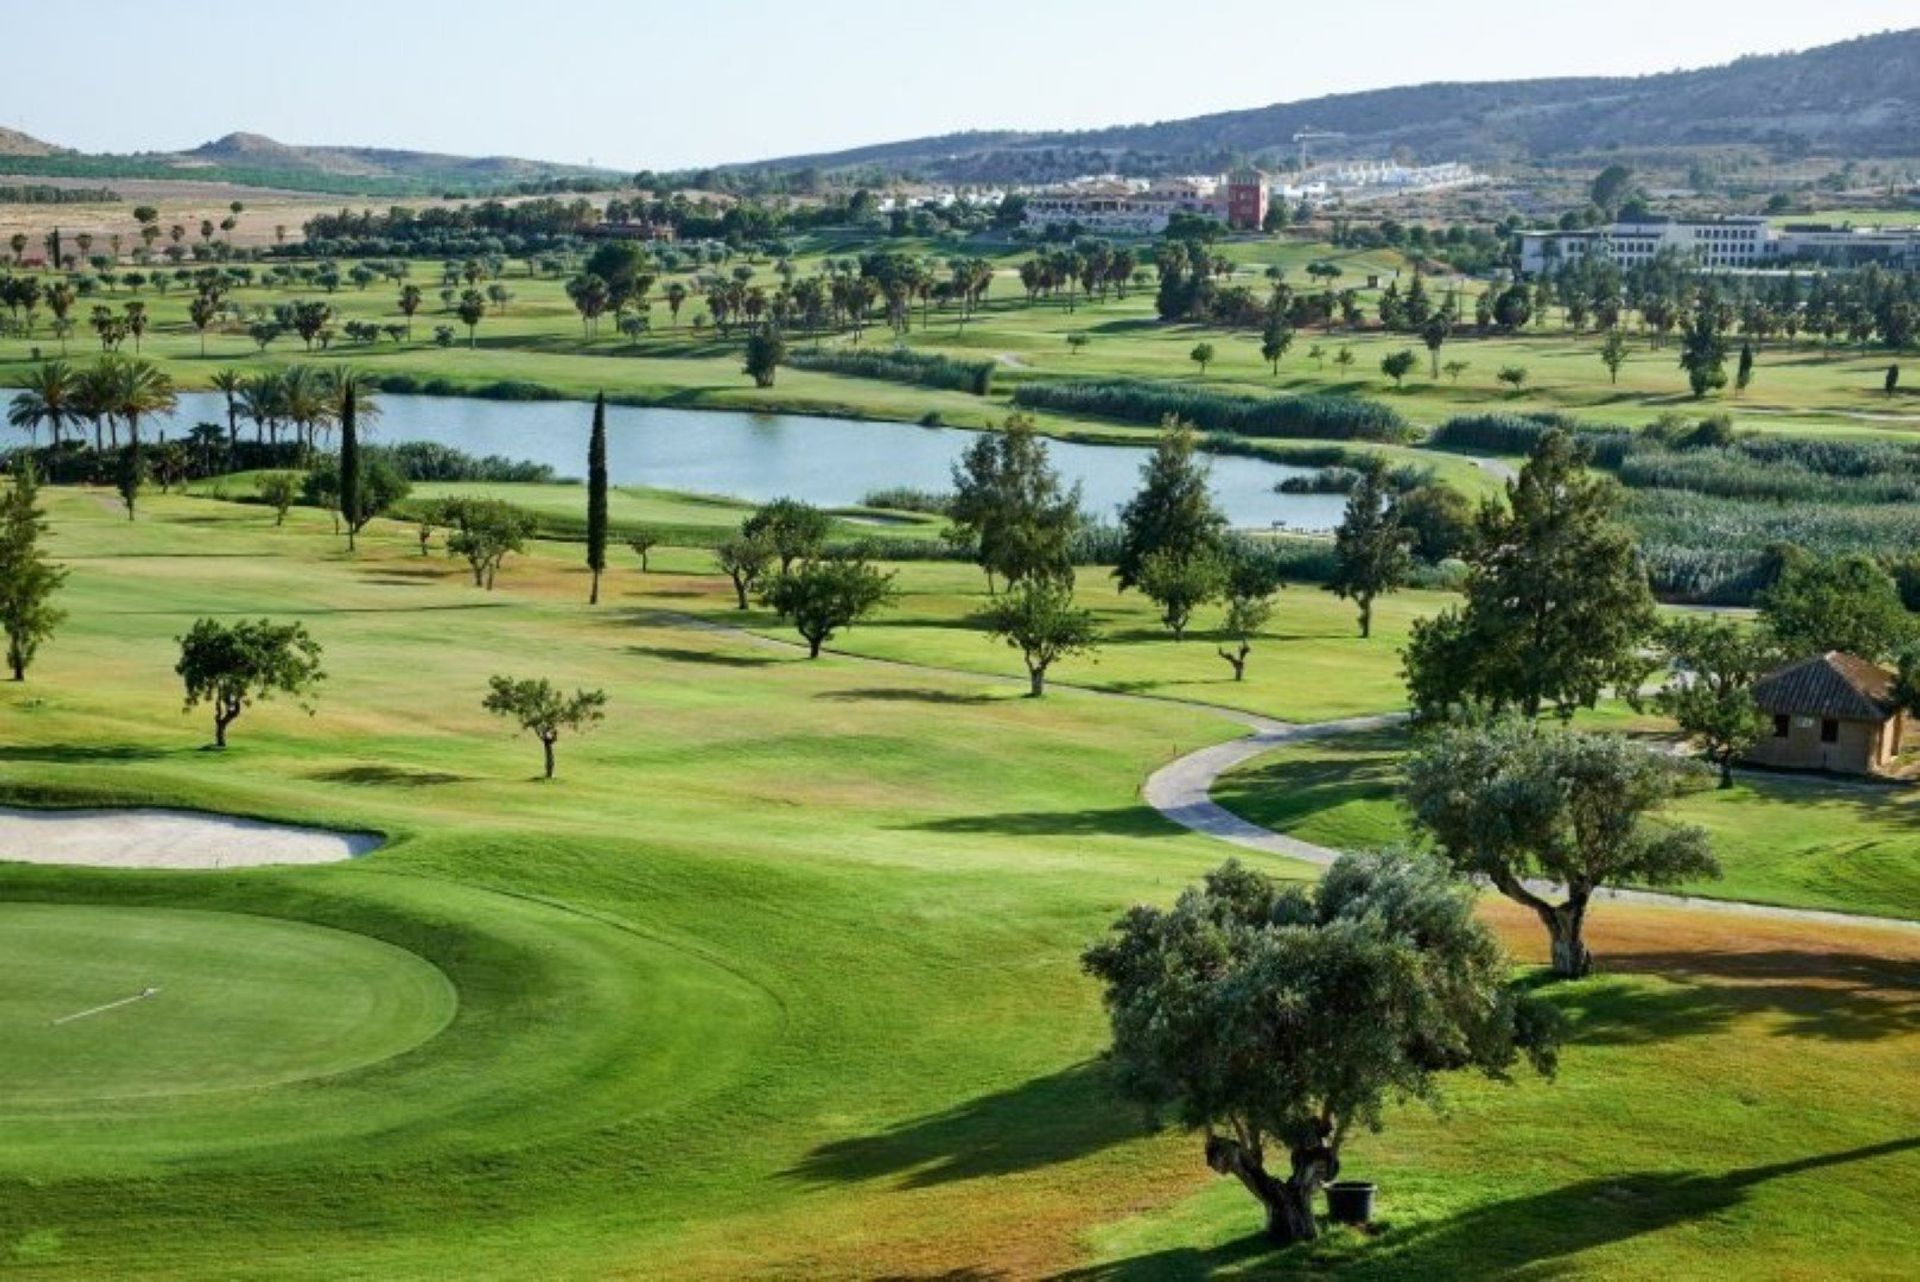 Practice your swing at one of the many superb golf courses that can be found in the surrounding region